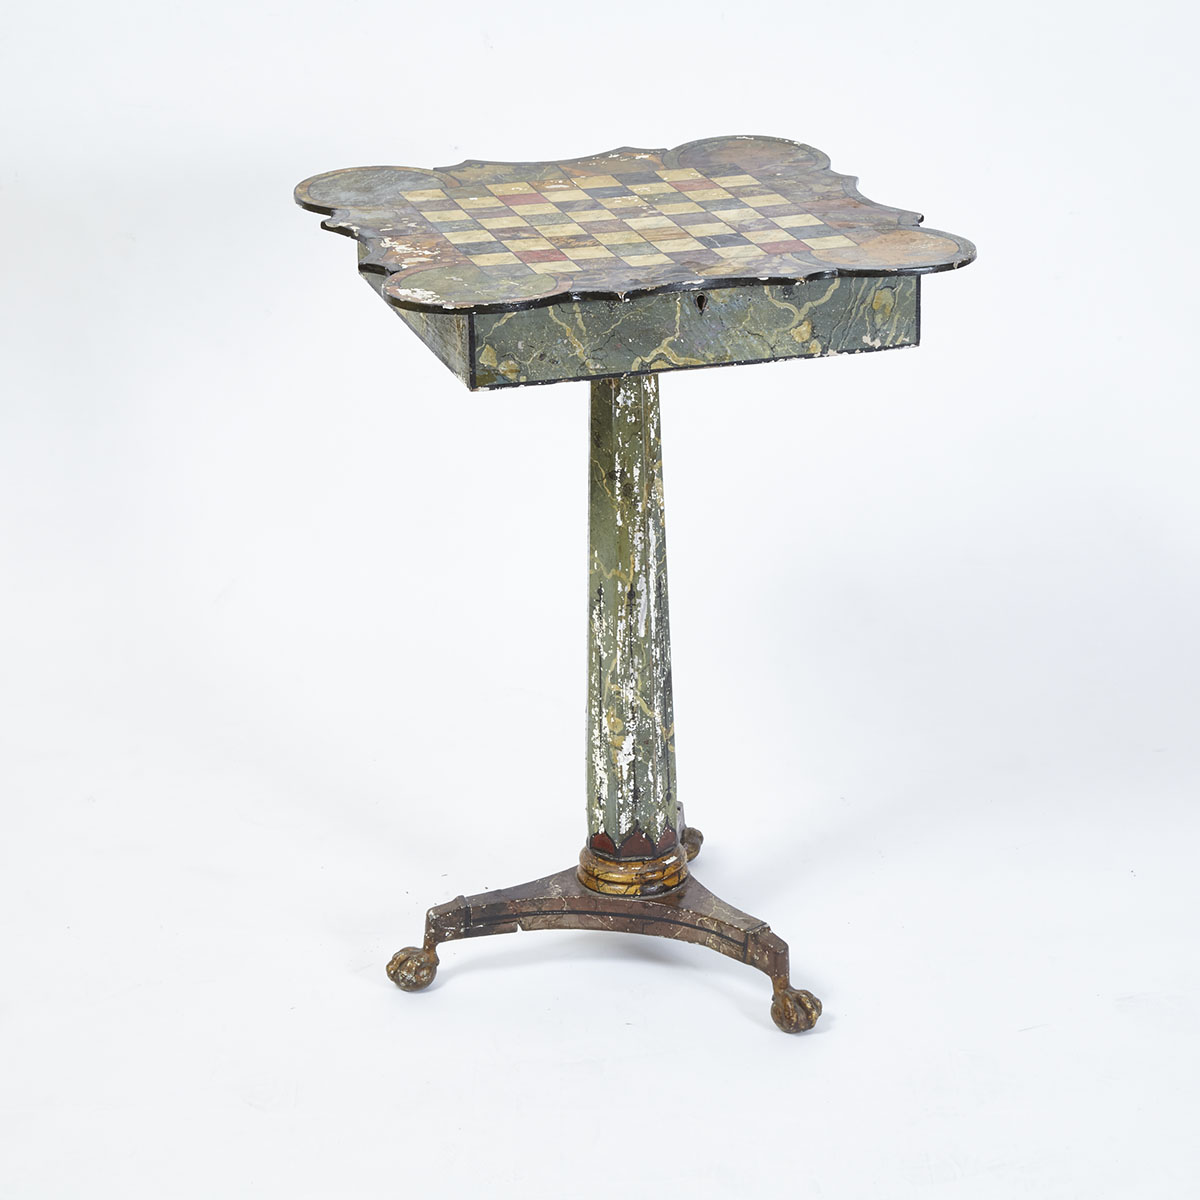 Italianate Polychromed Games Table, mid 19th century